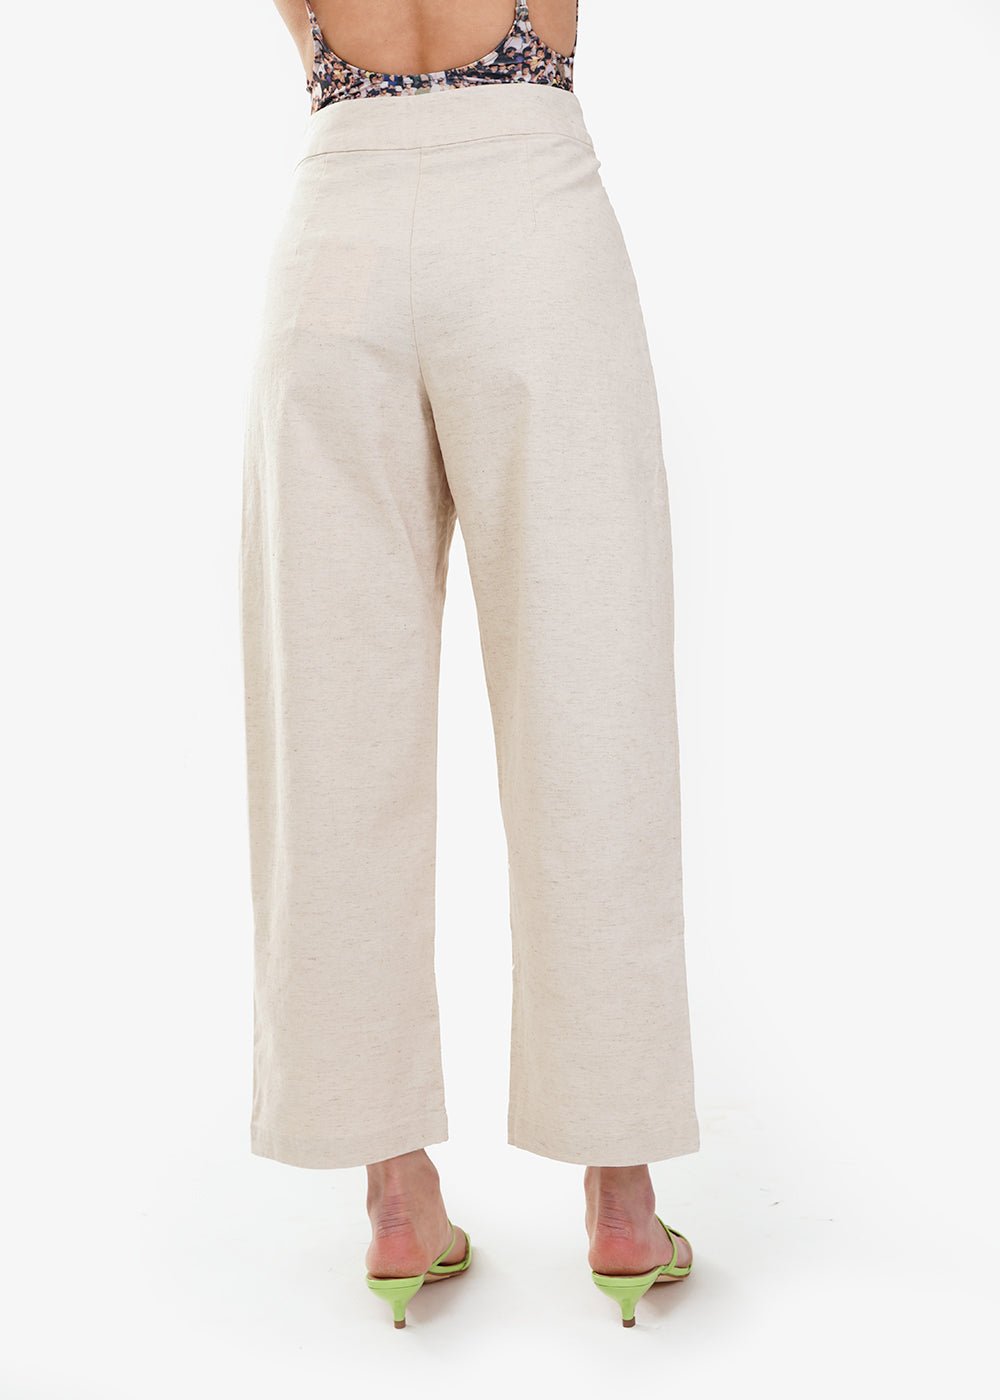 Paloma Wool Jueves Pants — Shop sustainable fashion and slow fashion at New Classics Studios